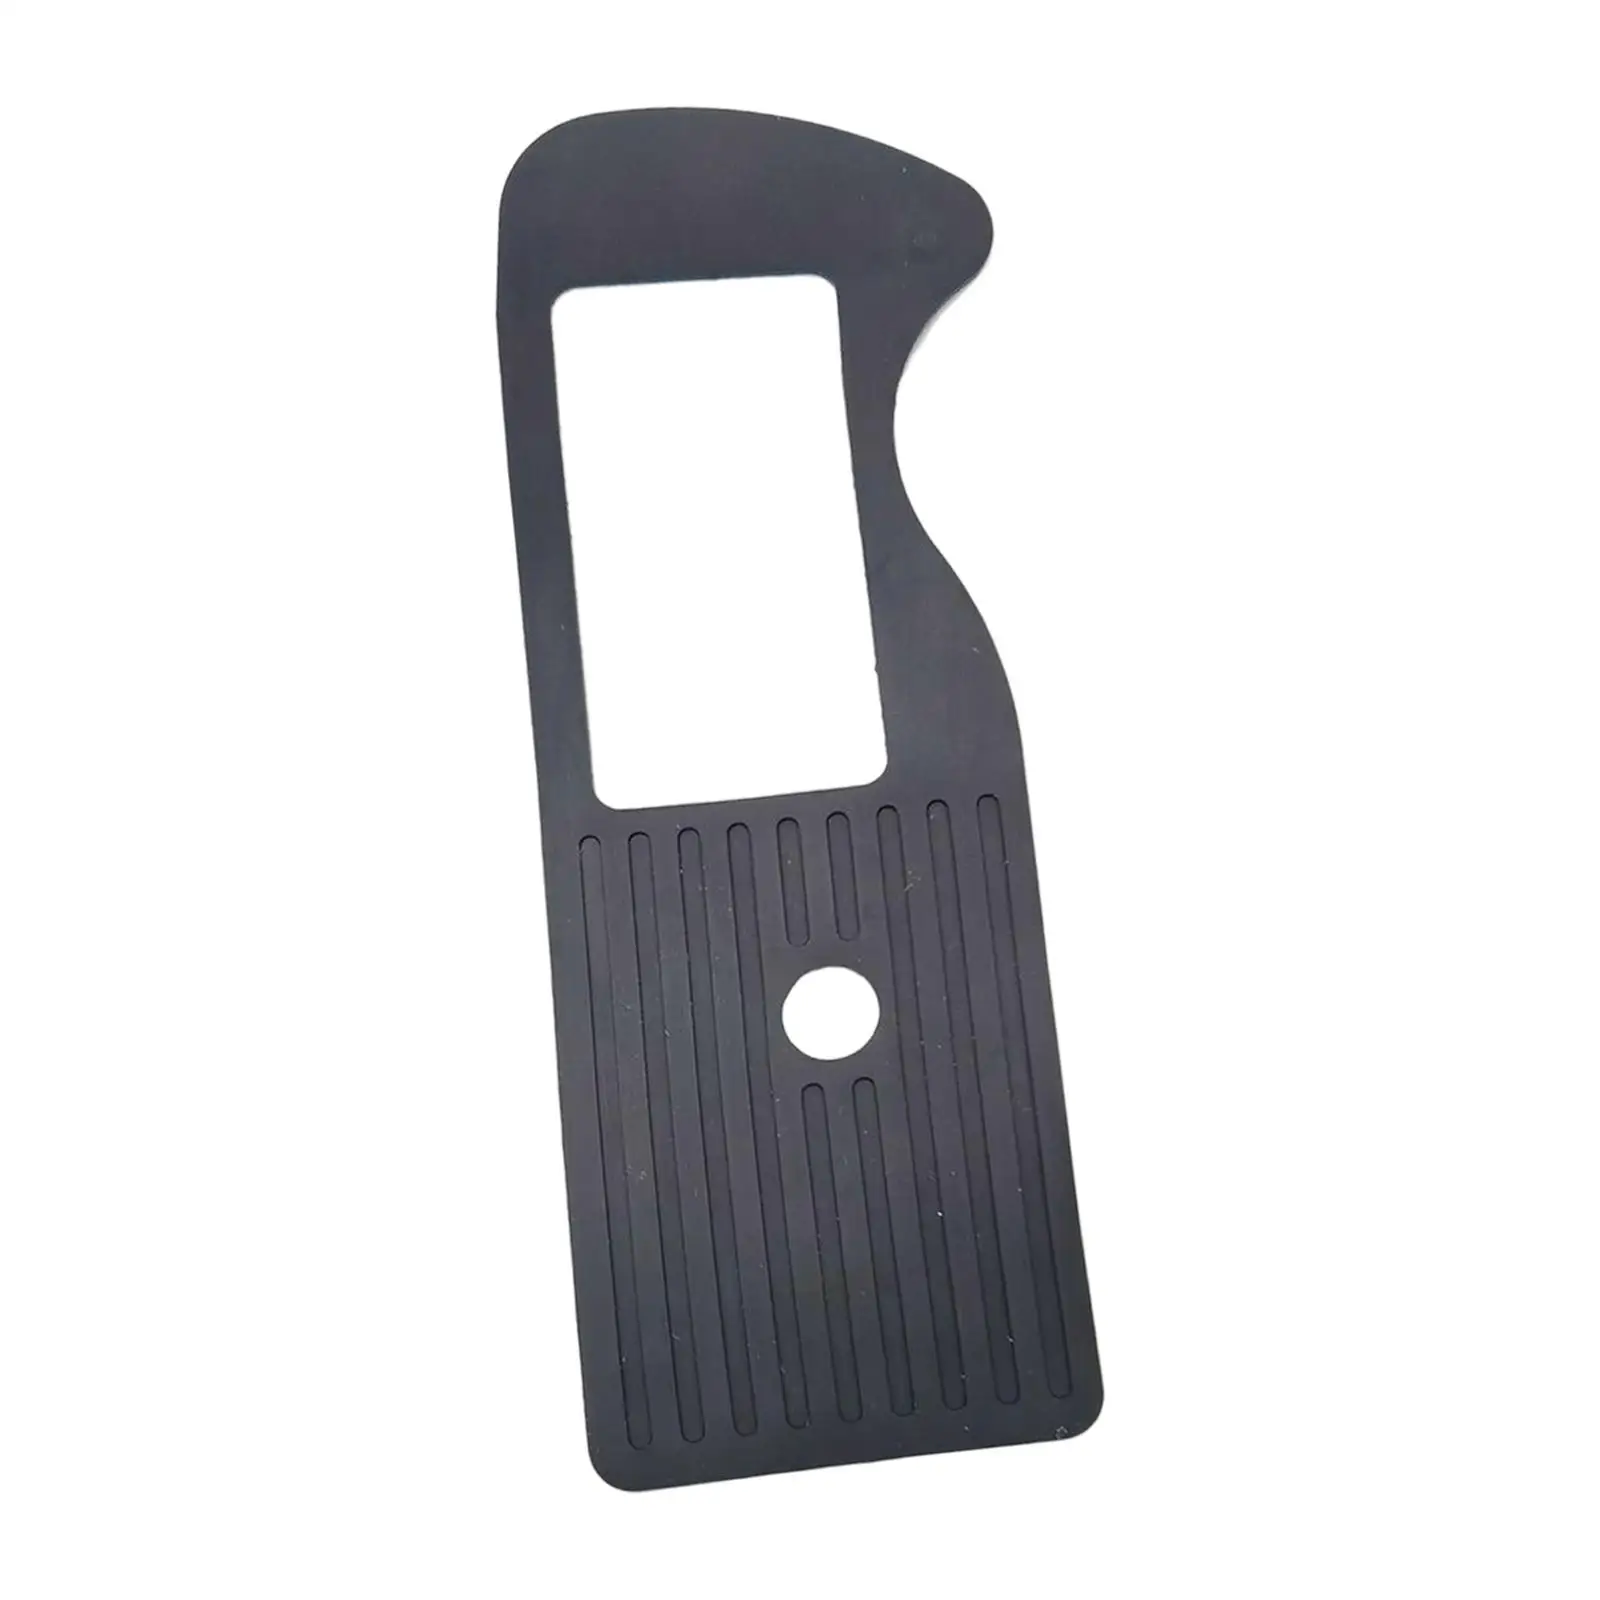 Professional Body Bottom Rubber Cover Repair Part for D3 D3S D3x Camera Accessories